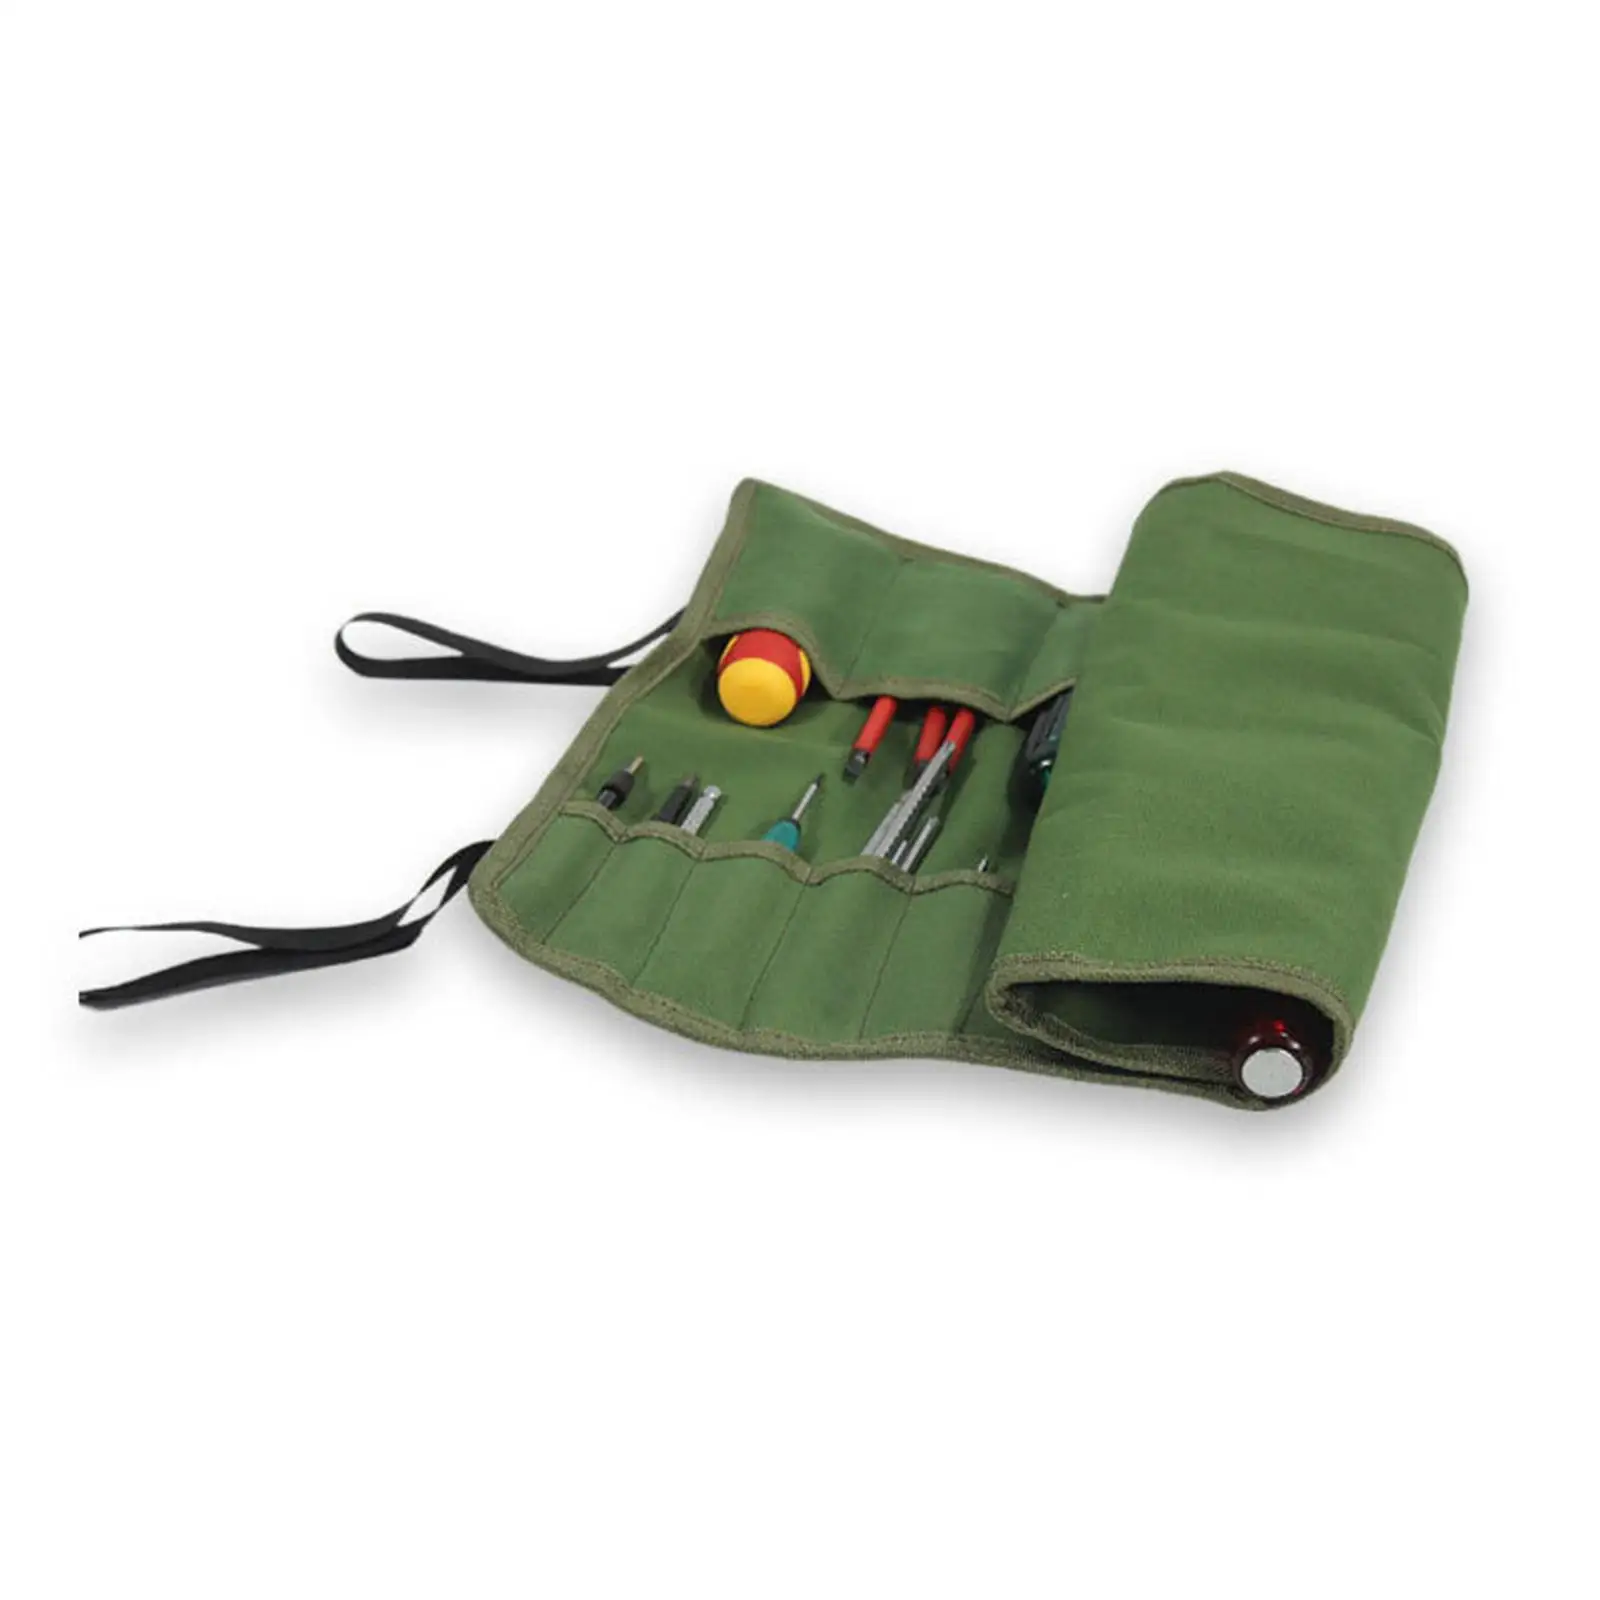 Roll up Tool Bag Organizer Canvas Tool Bag for Household Electrical Tool